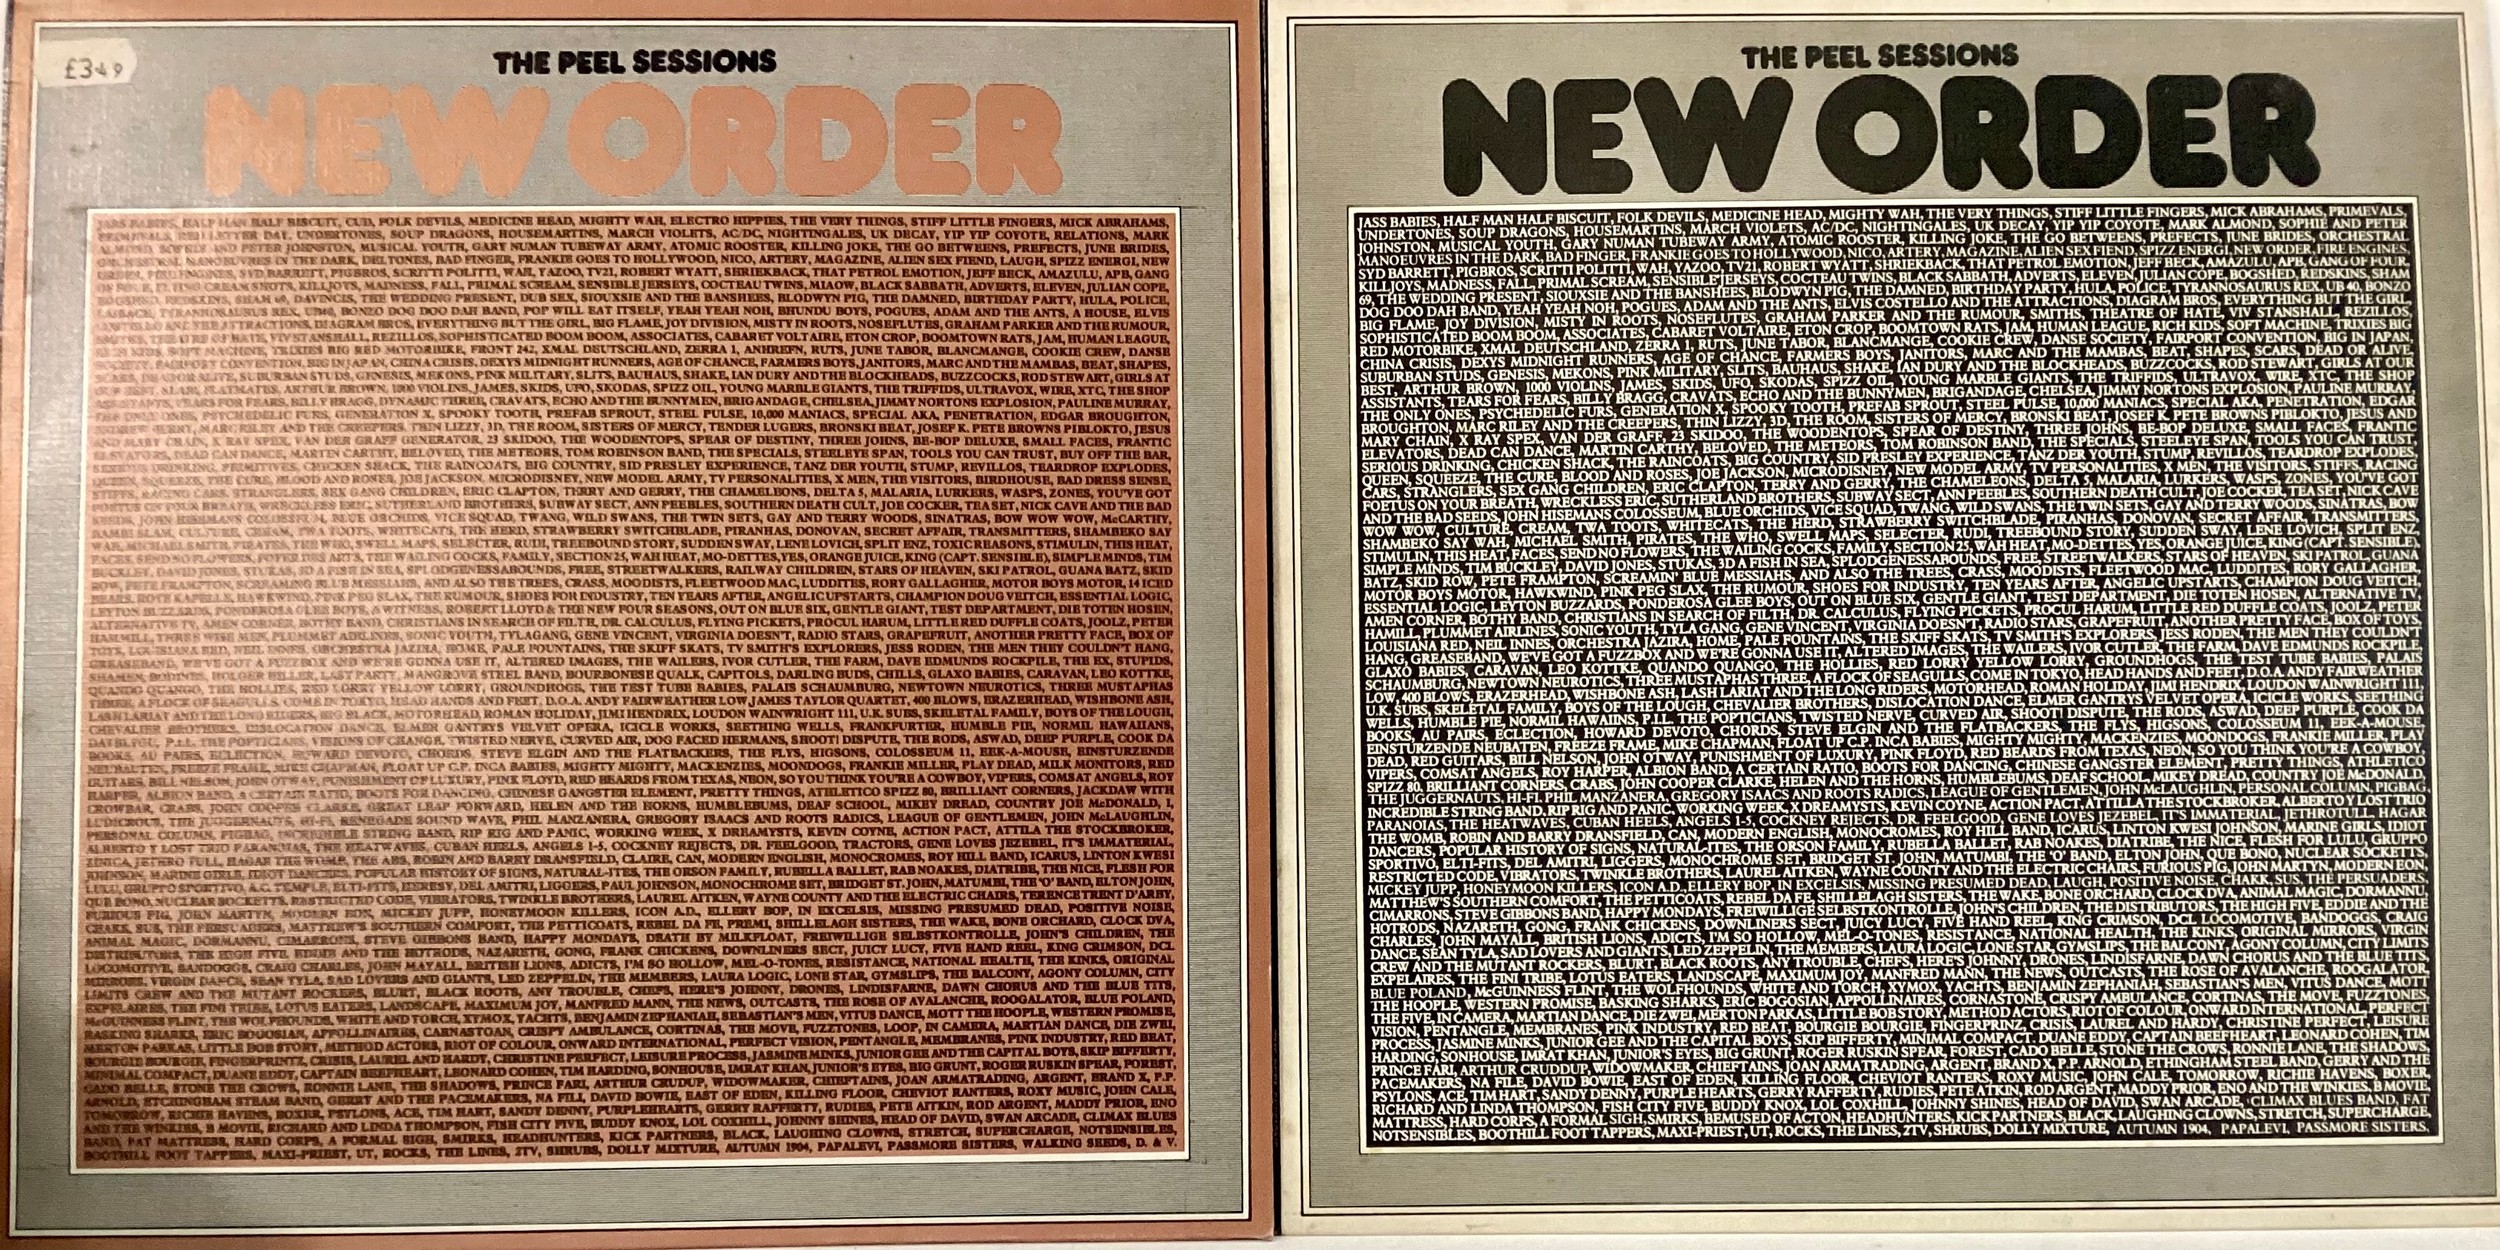 NEW ORDER PEEL SESSIONS X 2 VINYL RECORDS. Both found here on Strange Fruit Record labels SFPS 001 &